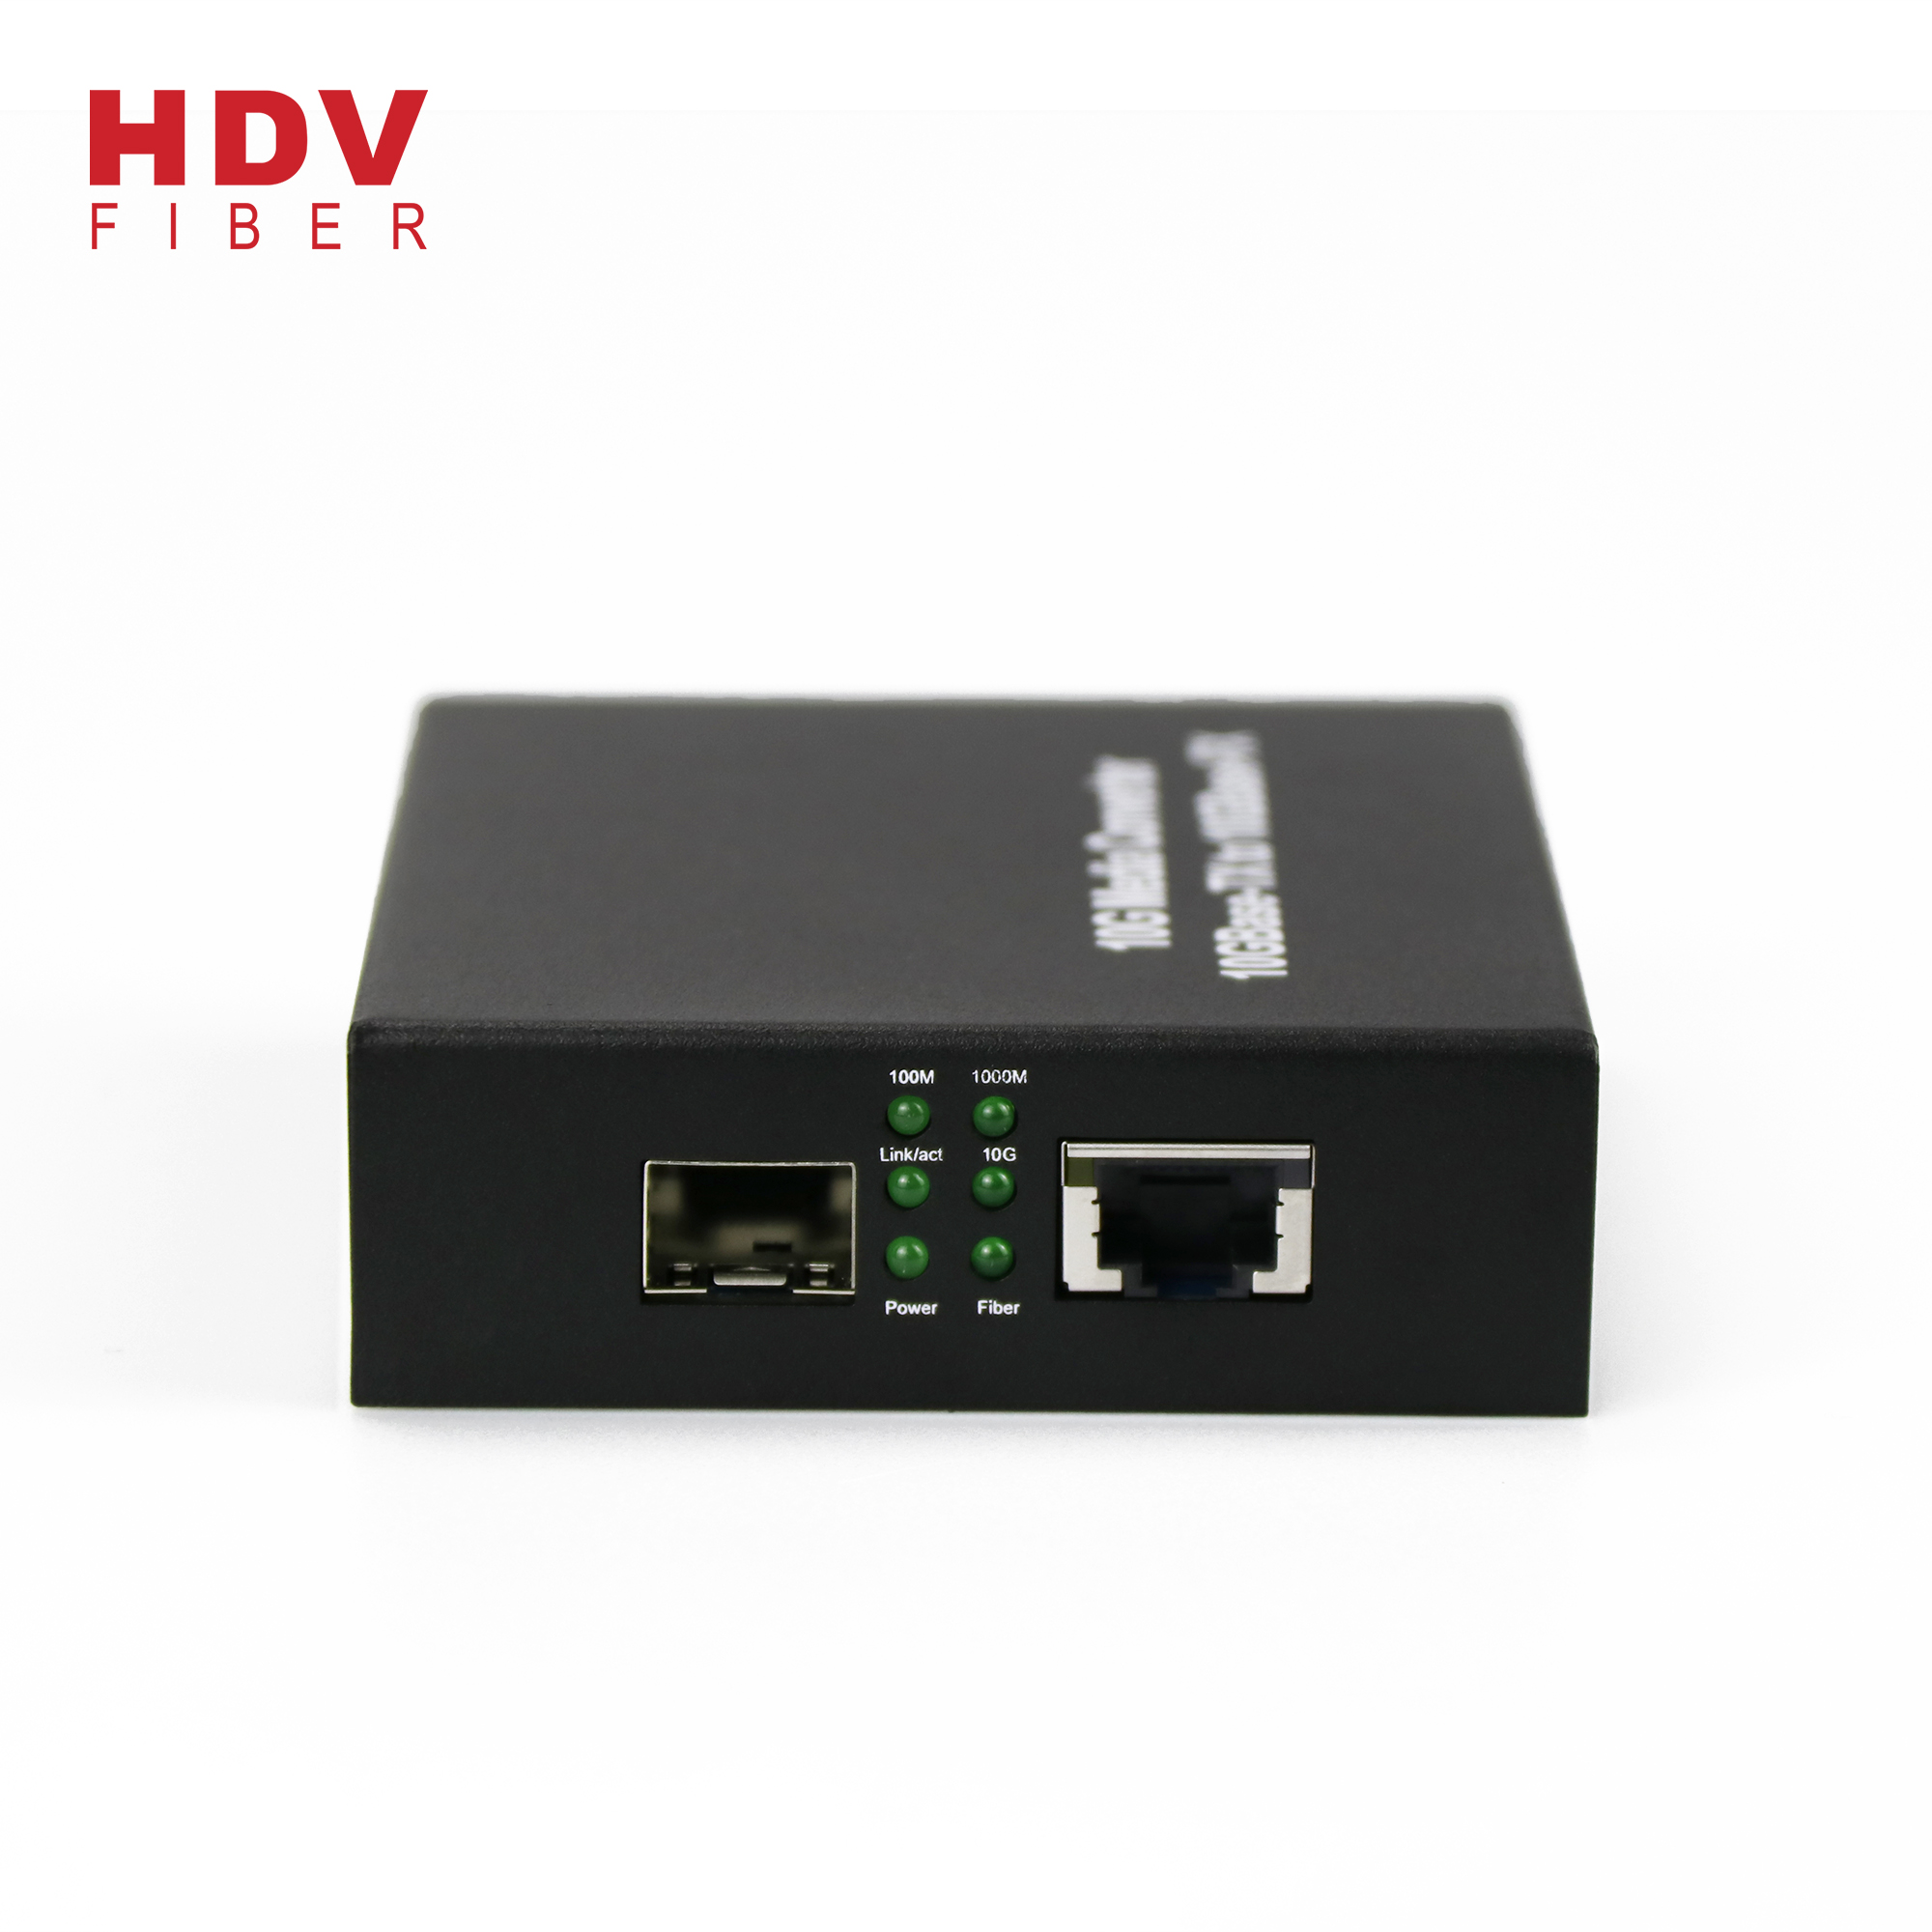 10G Sfp Media Converter With One Sfp Slot Featured Image